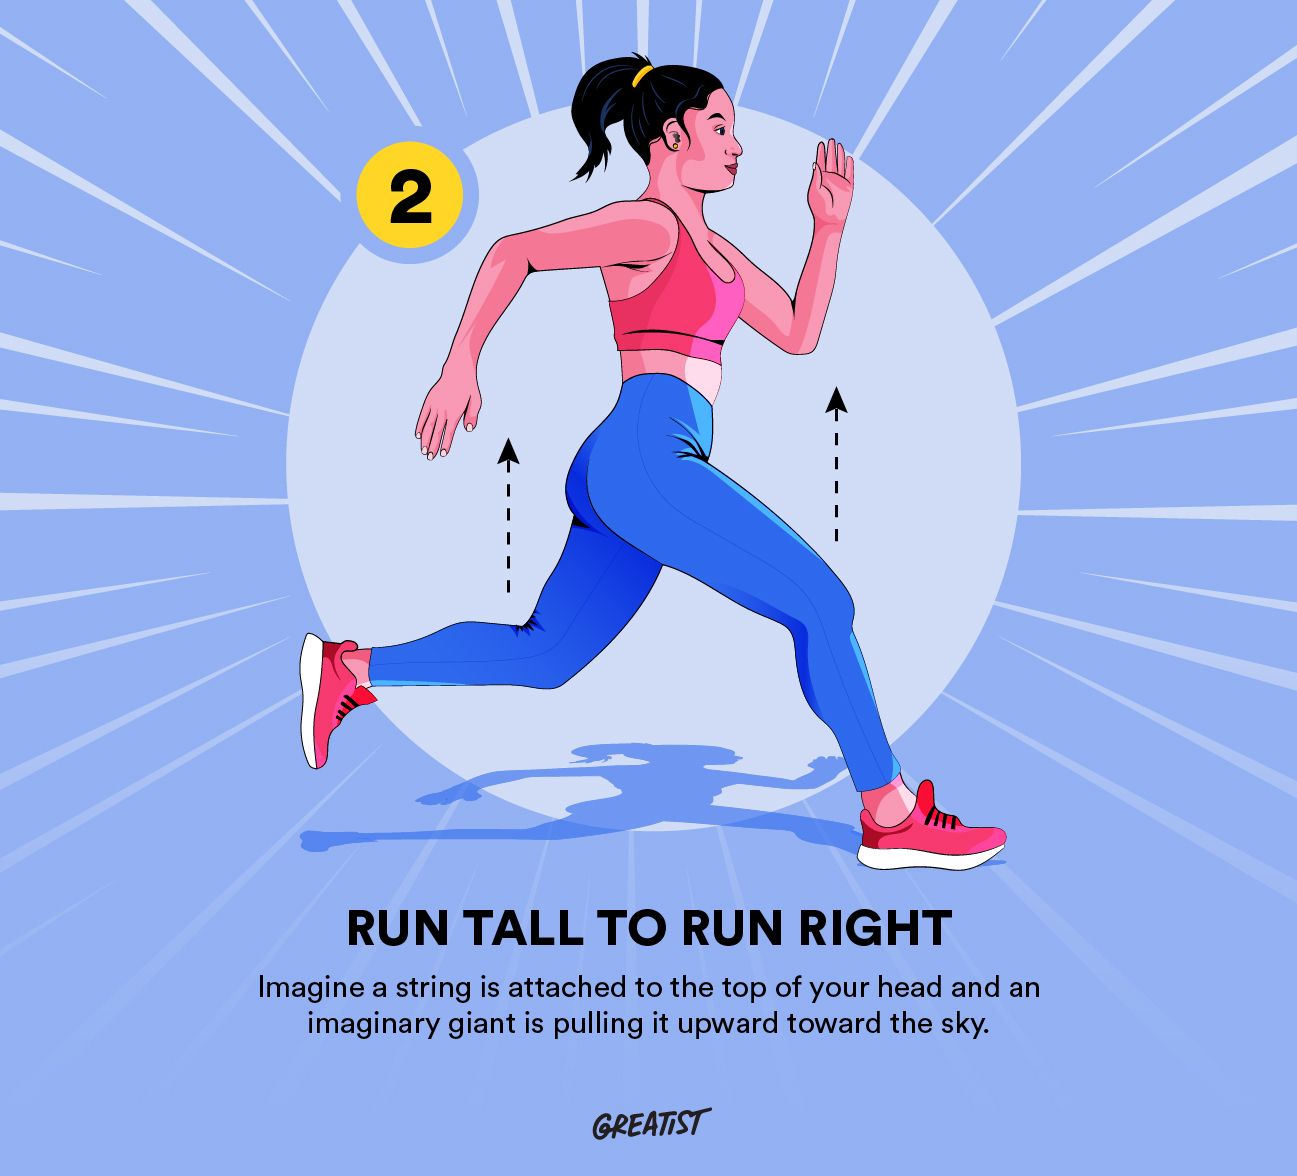 Proper Running Form: 3 Tips for Speed and Distance